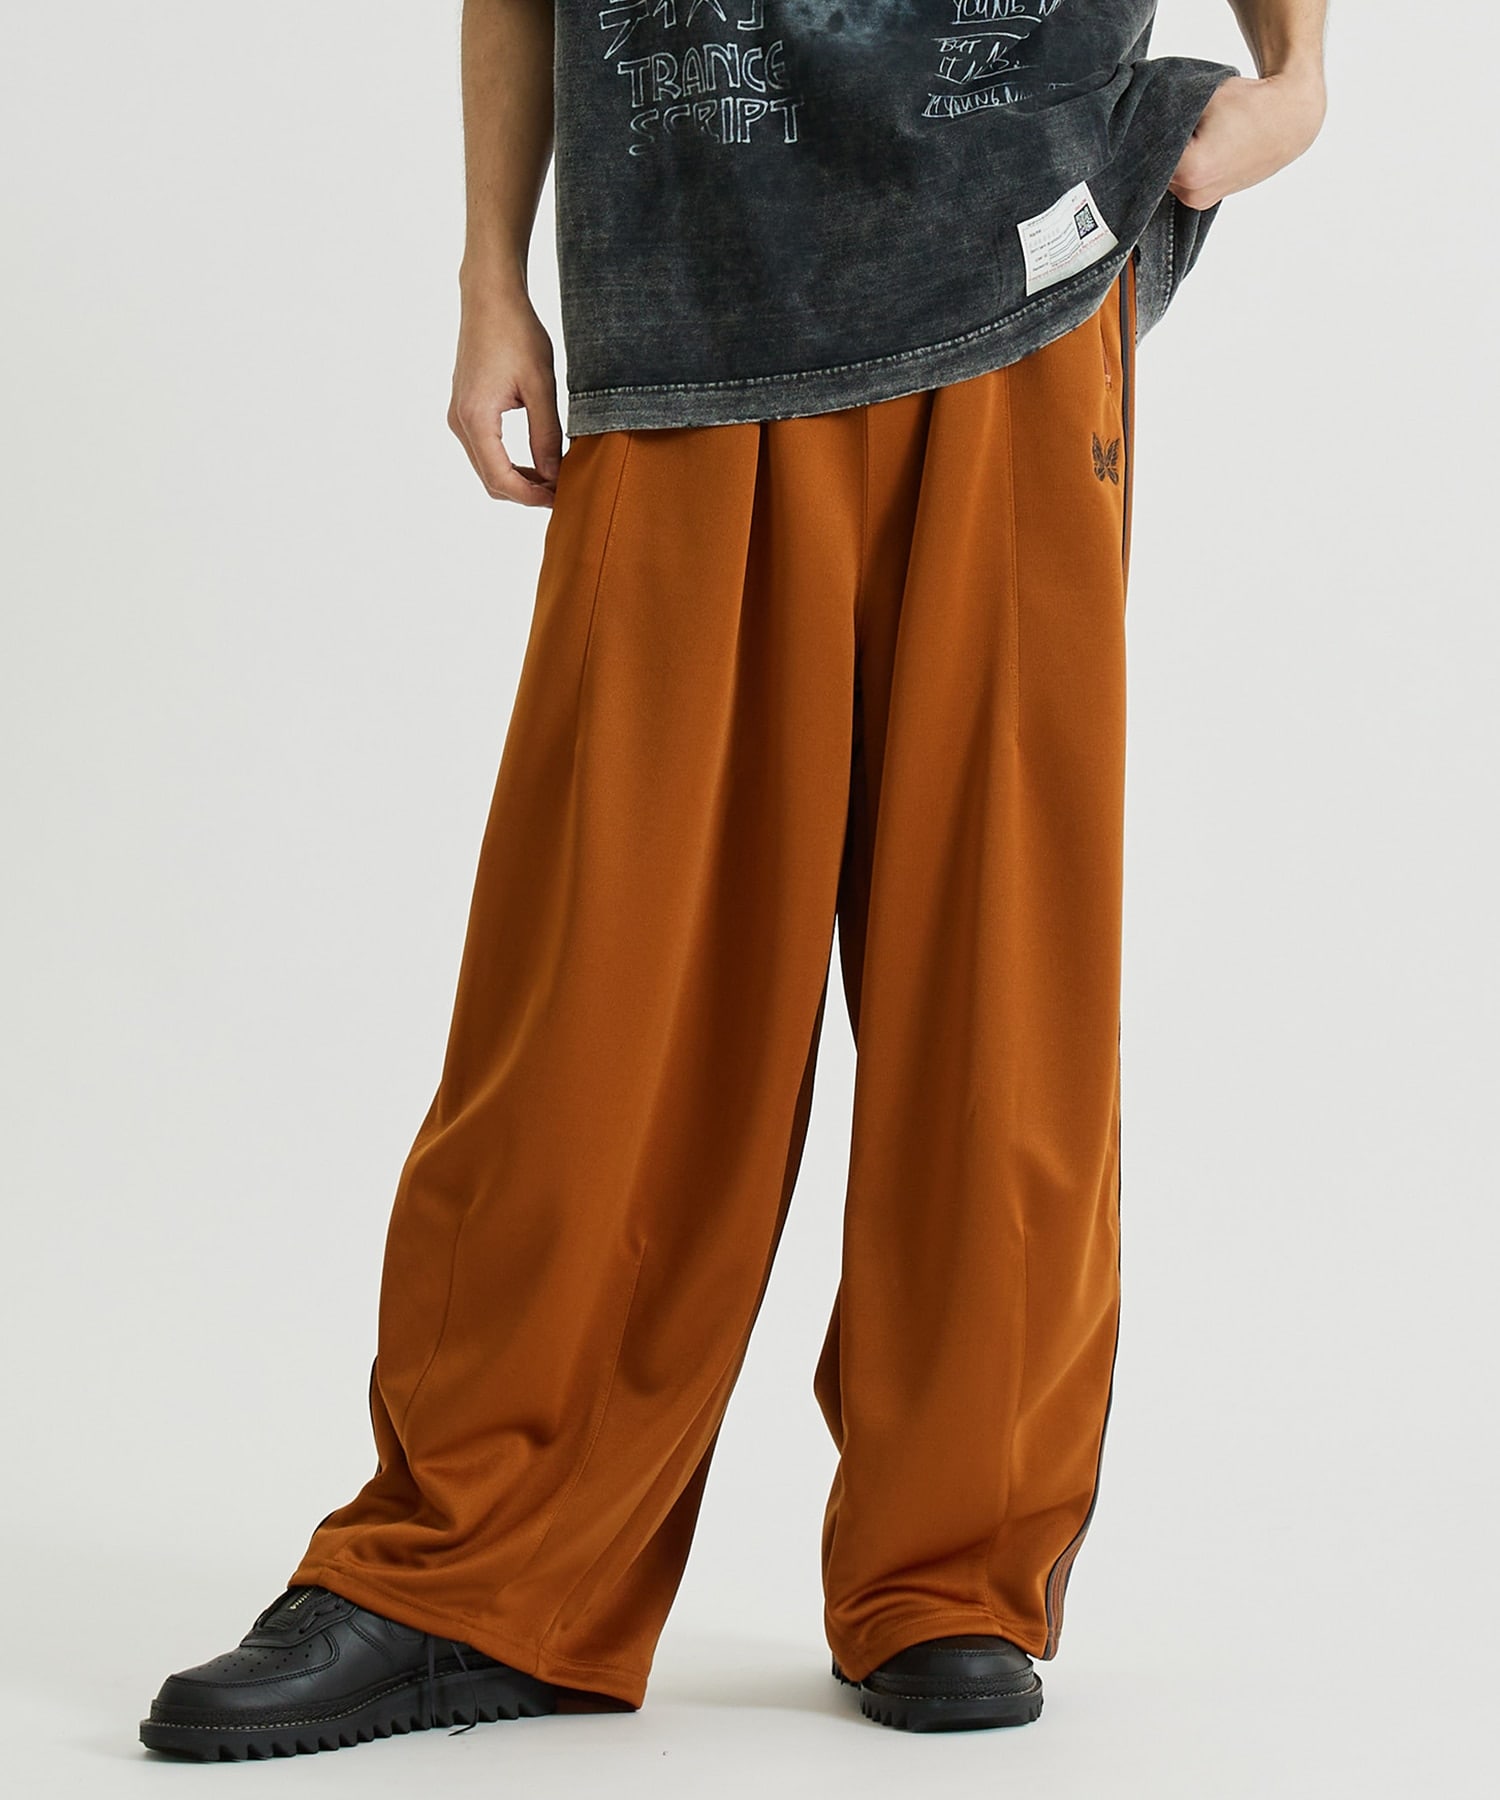 Needles H.D. TRACK PANT - POLY SMOOTHHDT